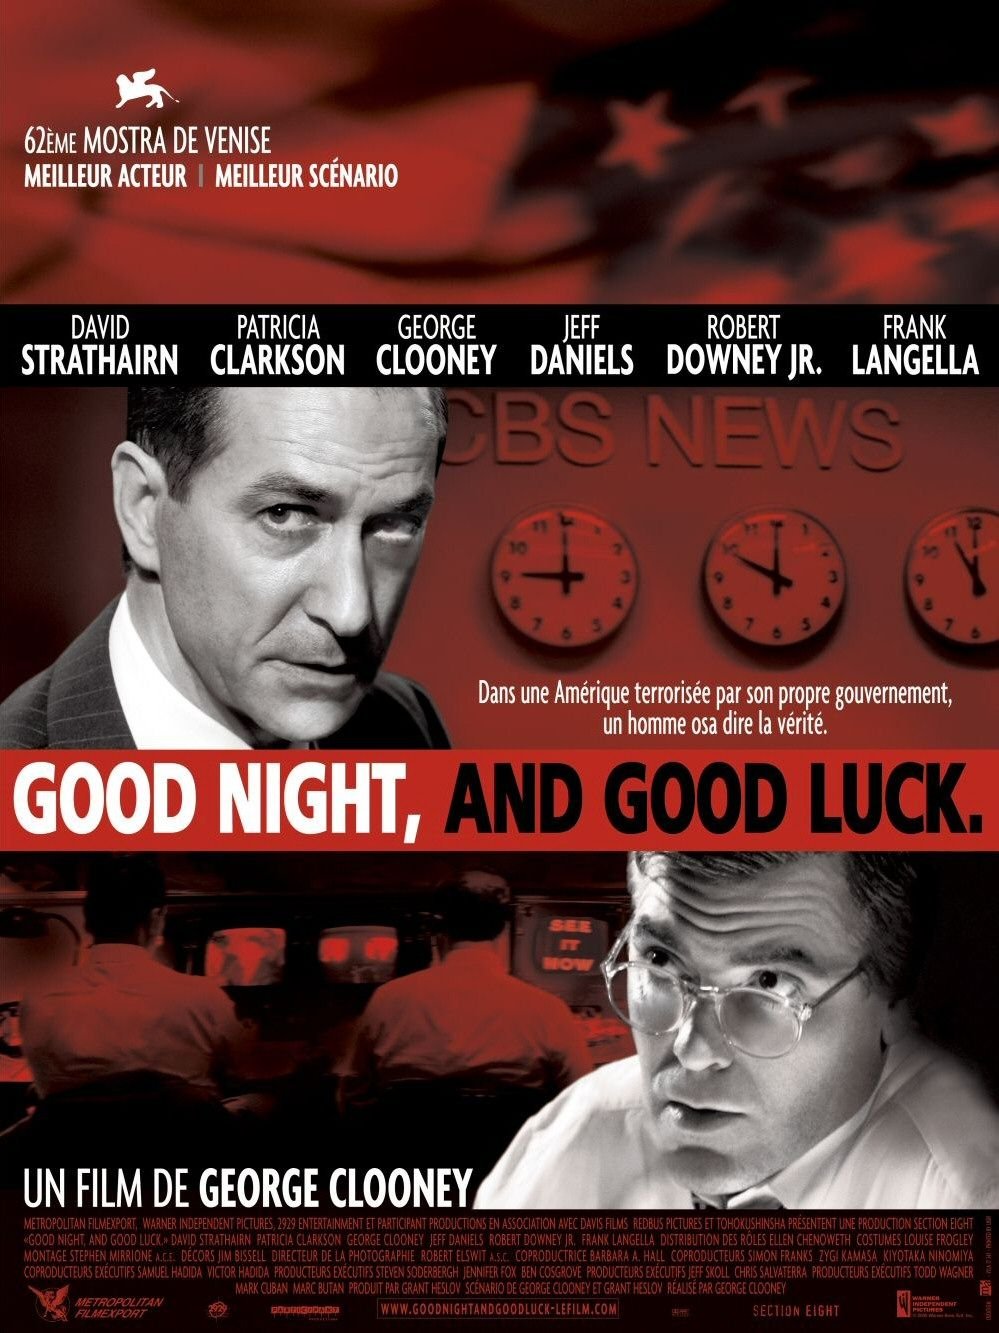 Poster of the movie Good Night, and Good Luck.